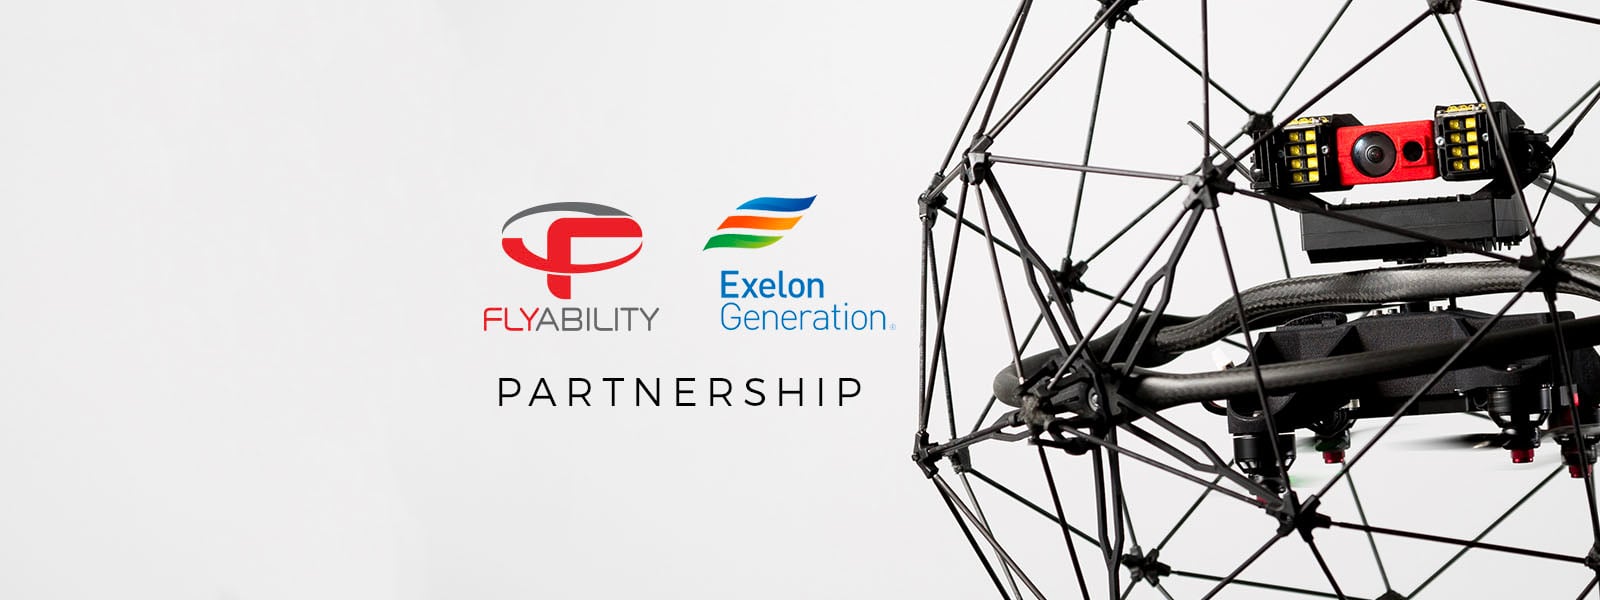 Exelon AeroLabs Becomes an Authorized Reseller of the Flyability Elios